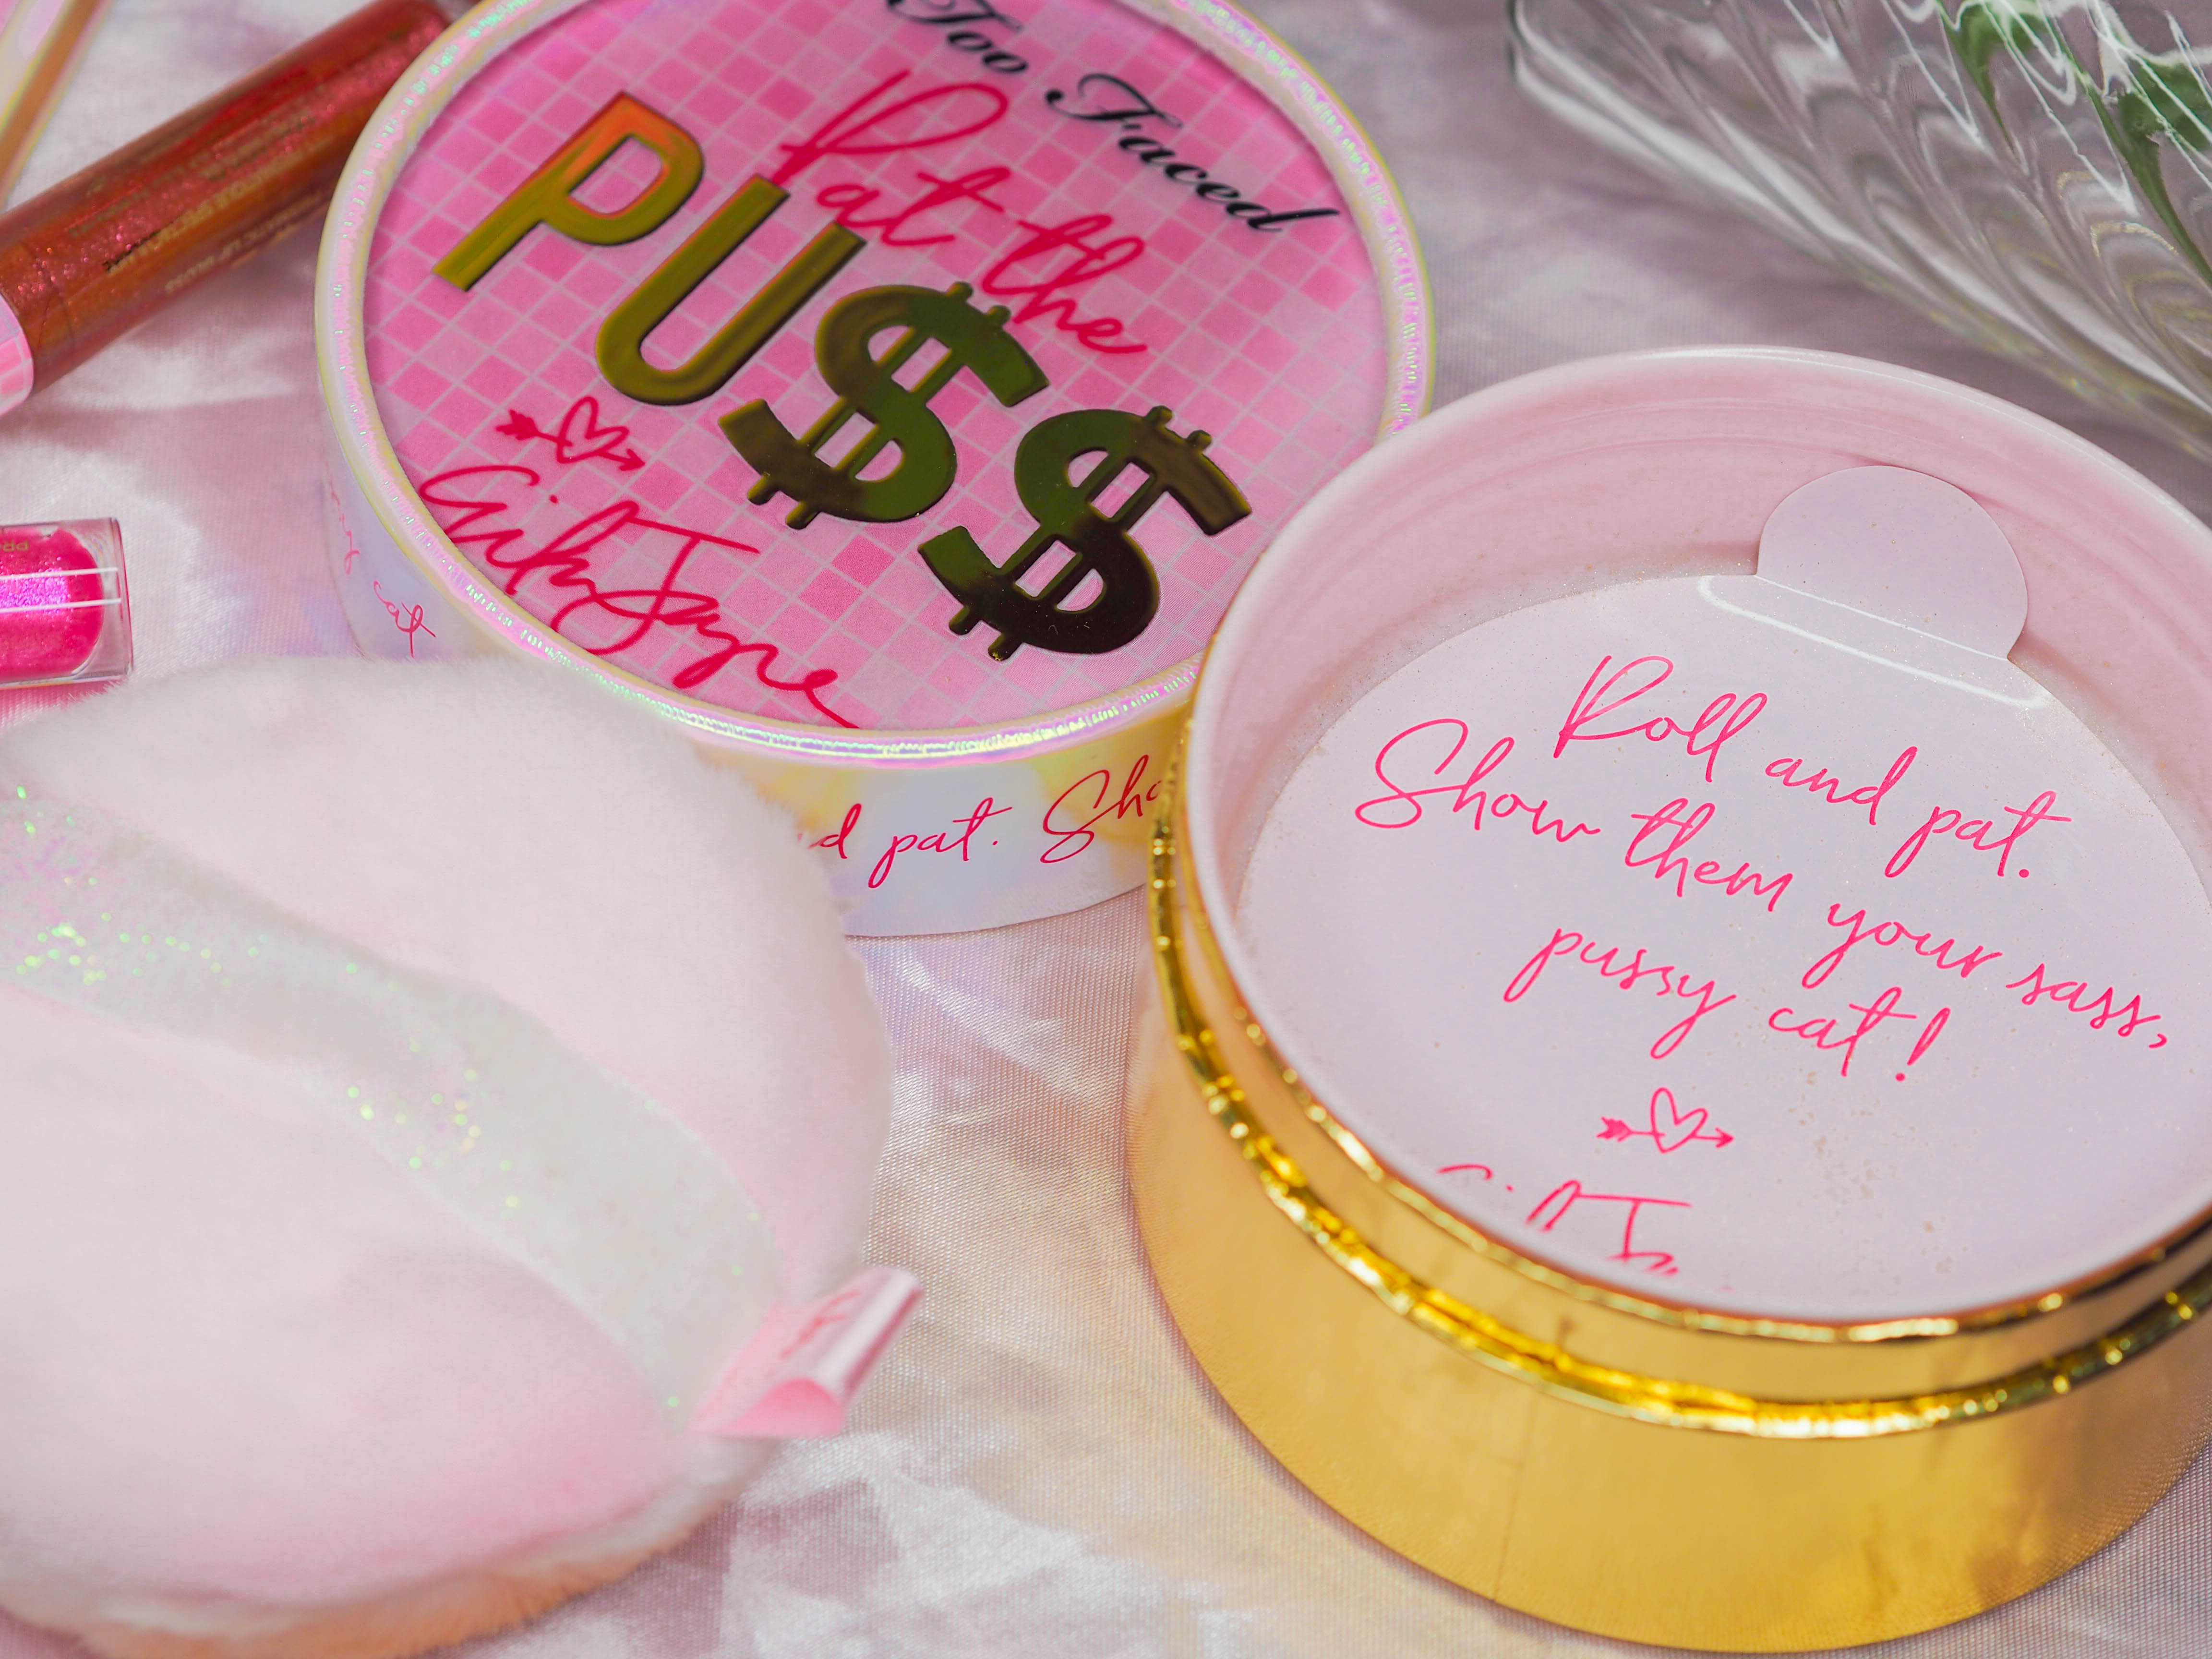 Too Faced Pretty Mess Pat the Puss